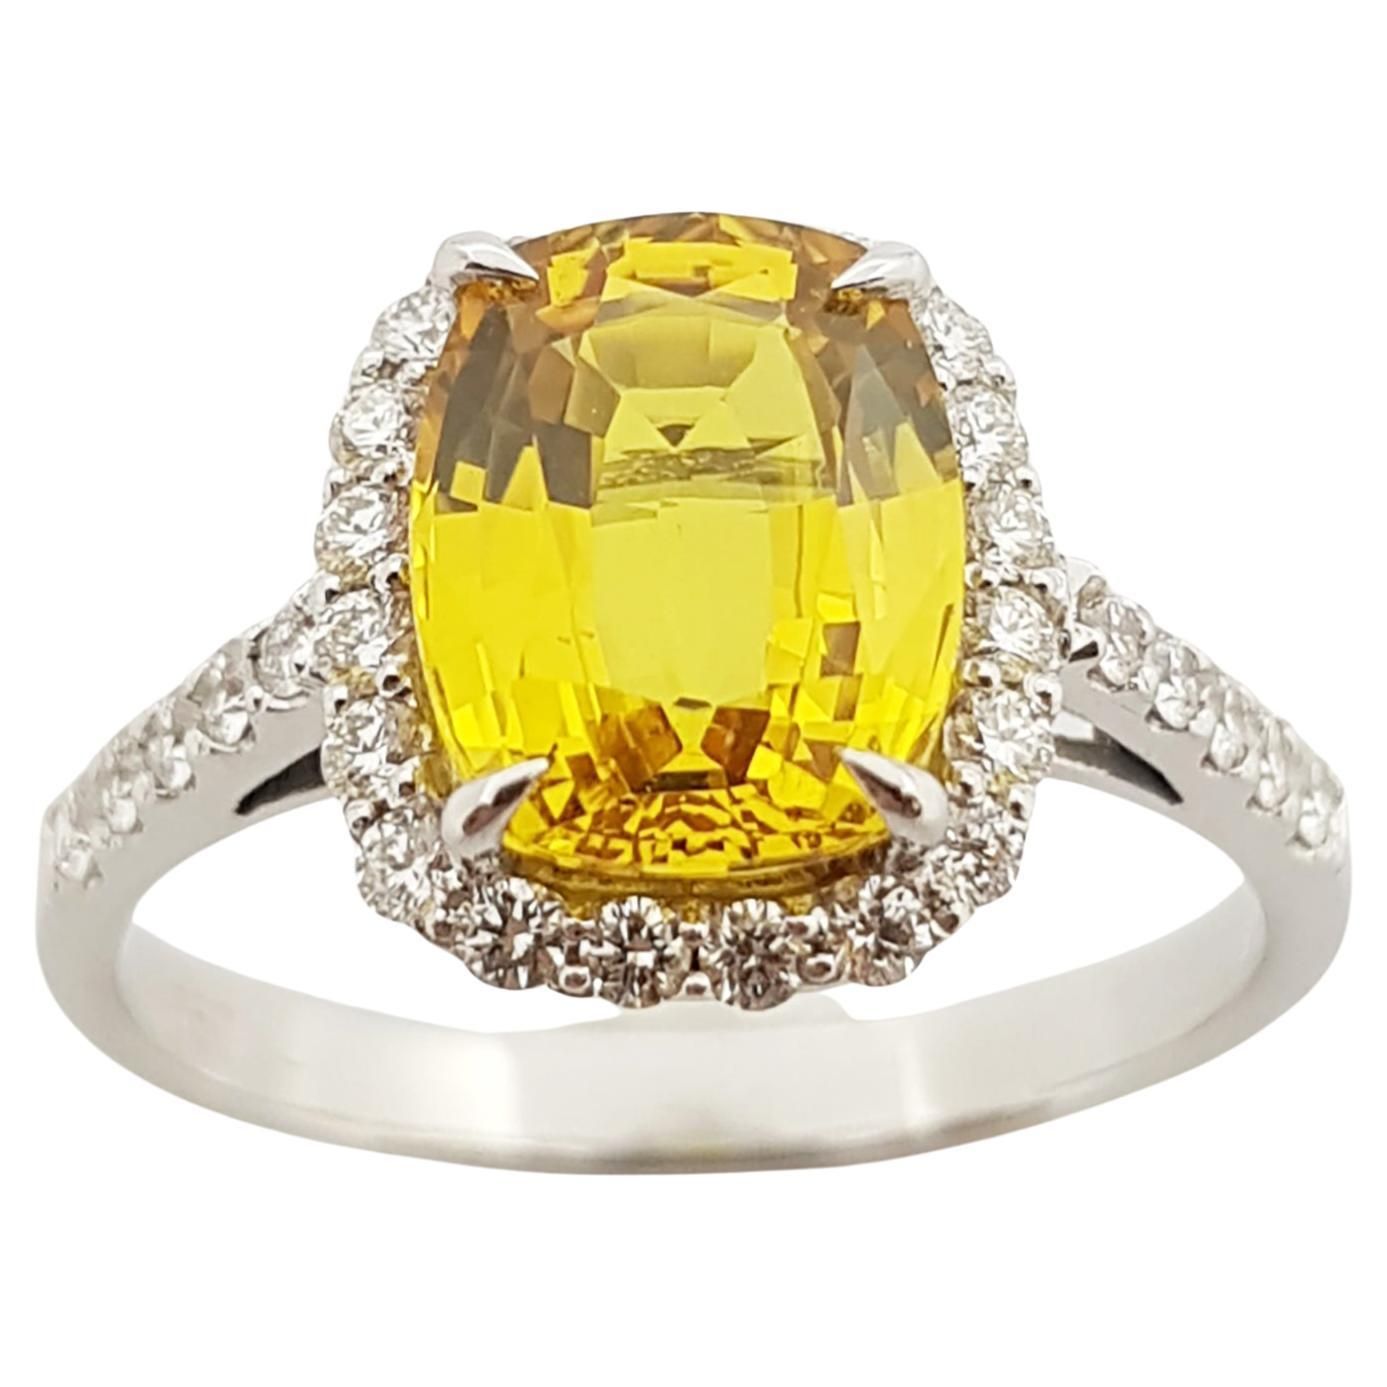 Cushion Cut Yellow Sapphire With Diamond Halo Ring Set In 18 Karat White  Gold For Sale At 1stdibs In Yellow Sapphire Double Halo Cocktail Rings (View 6 of 25)